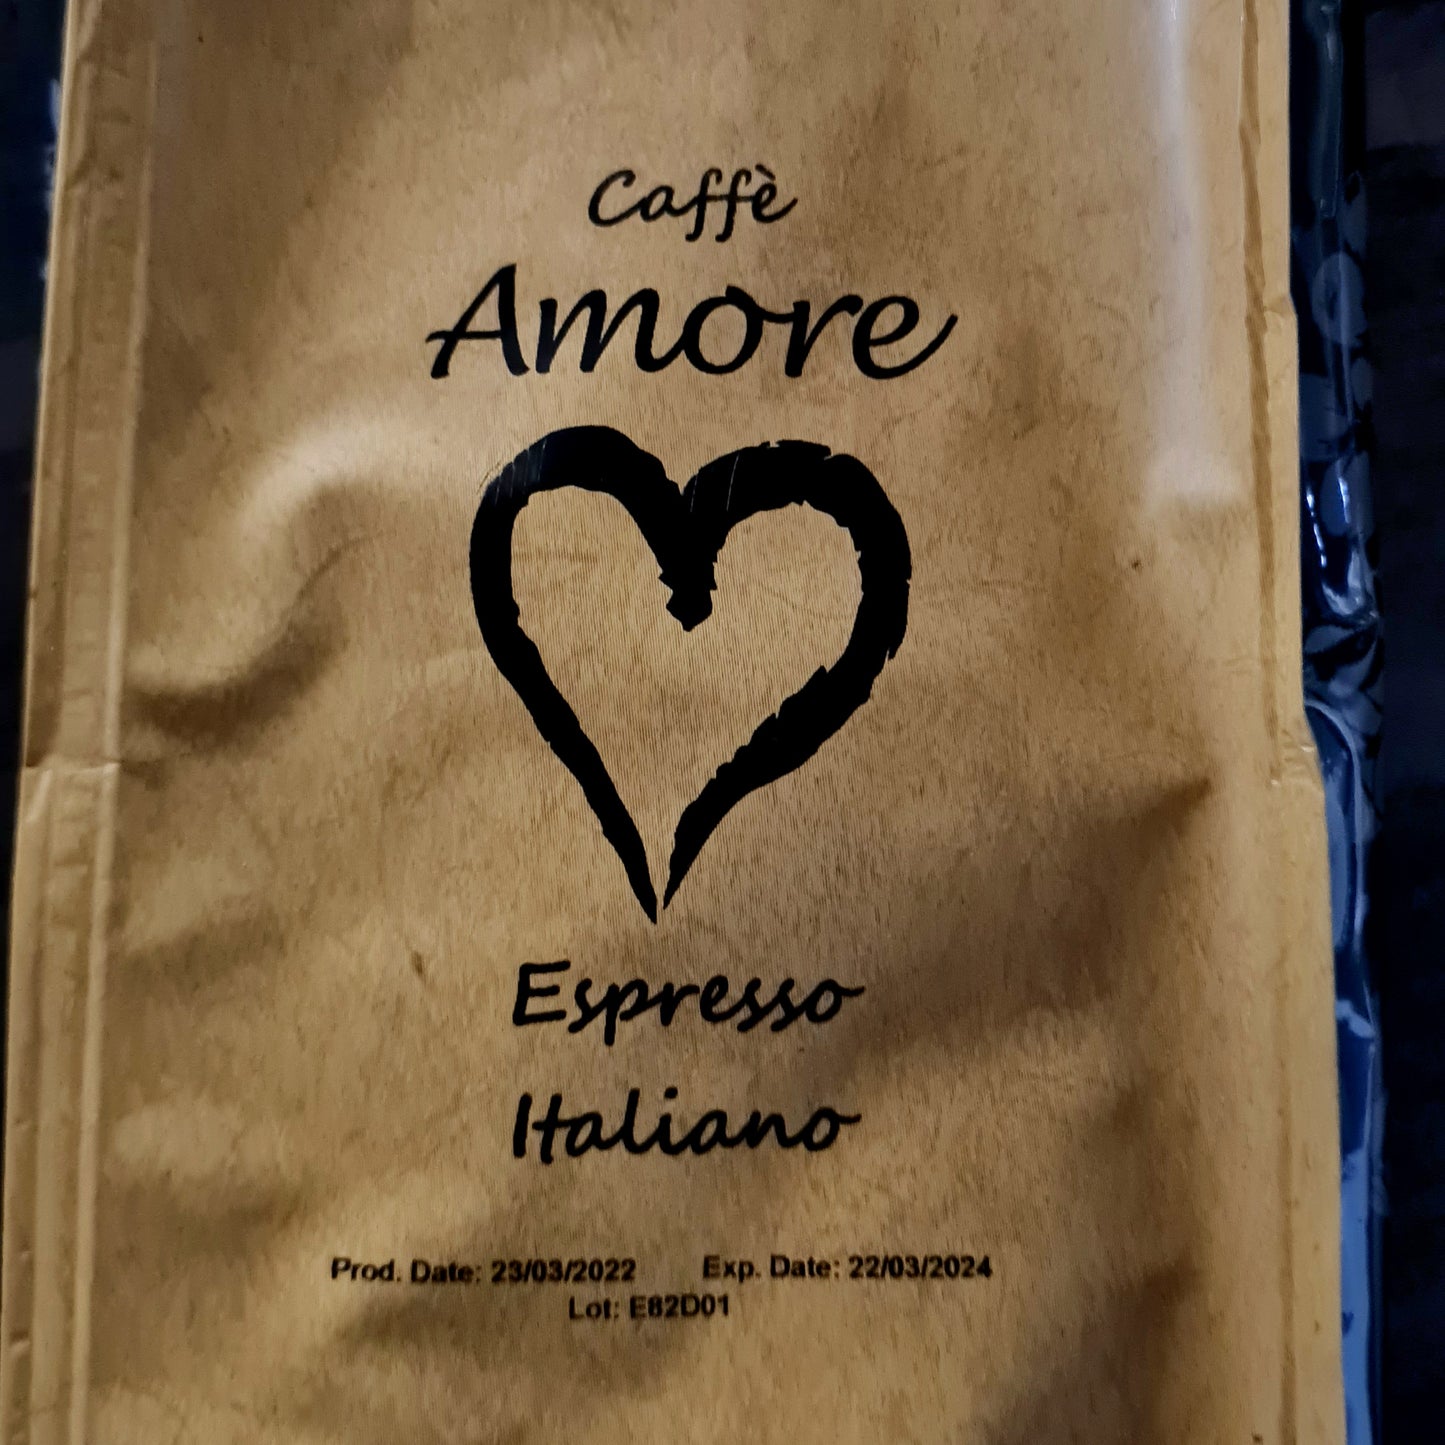 Cafe' Amore